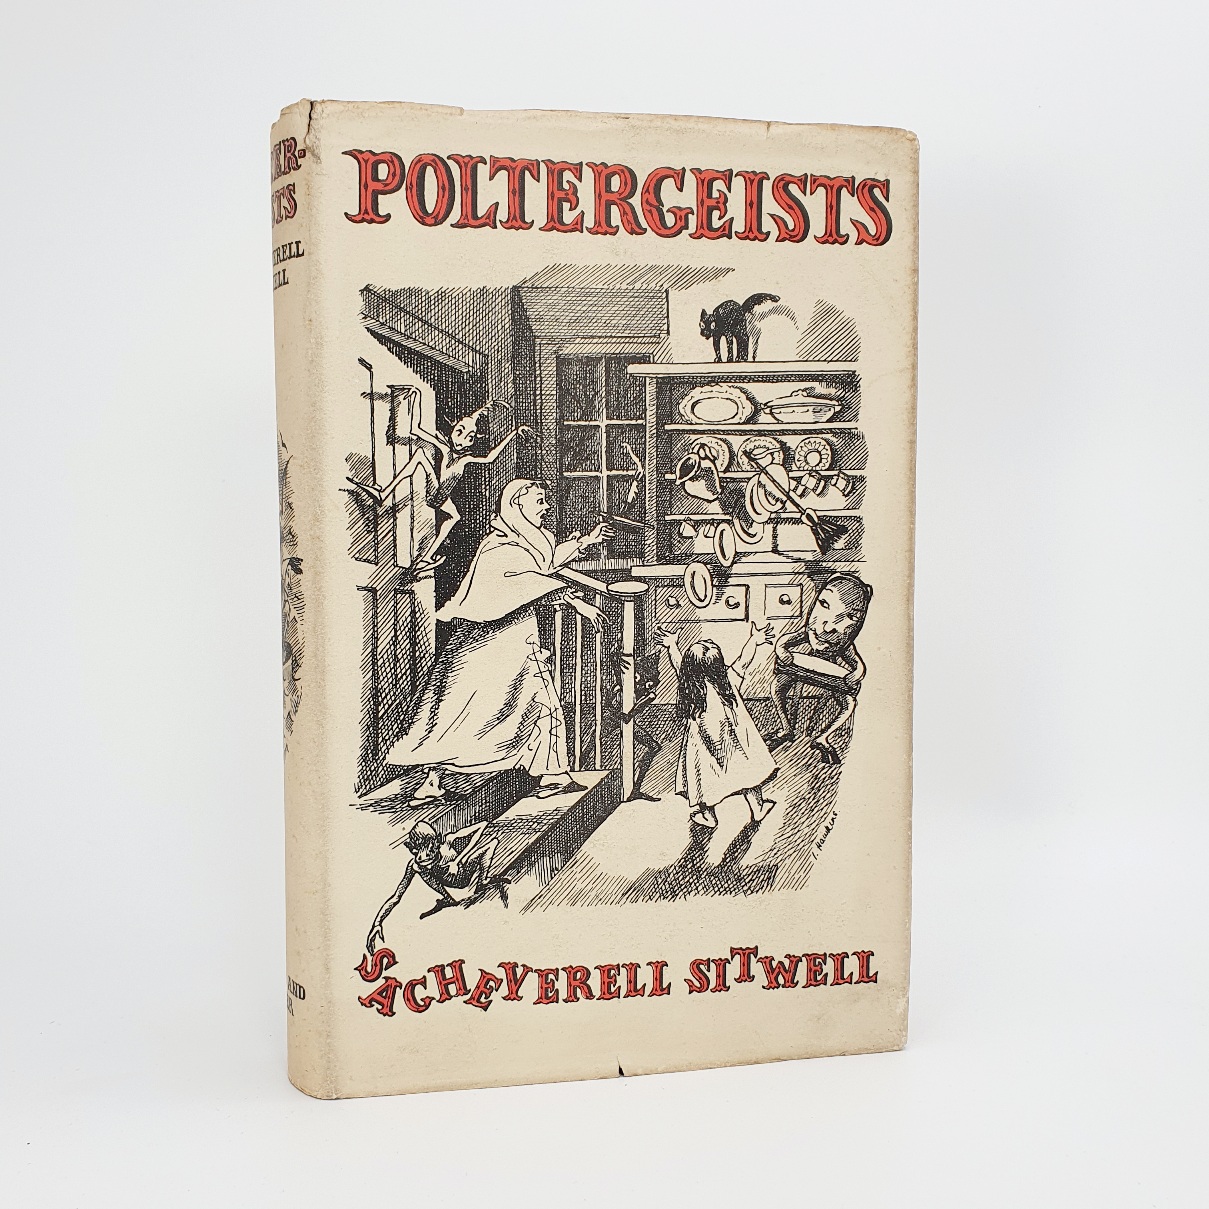 Poltergeists. An Introduction and Examination followed by Chosen Instances